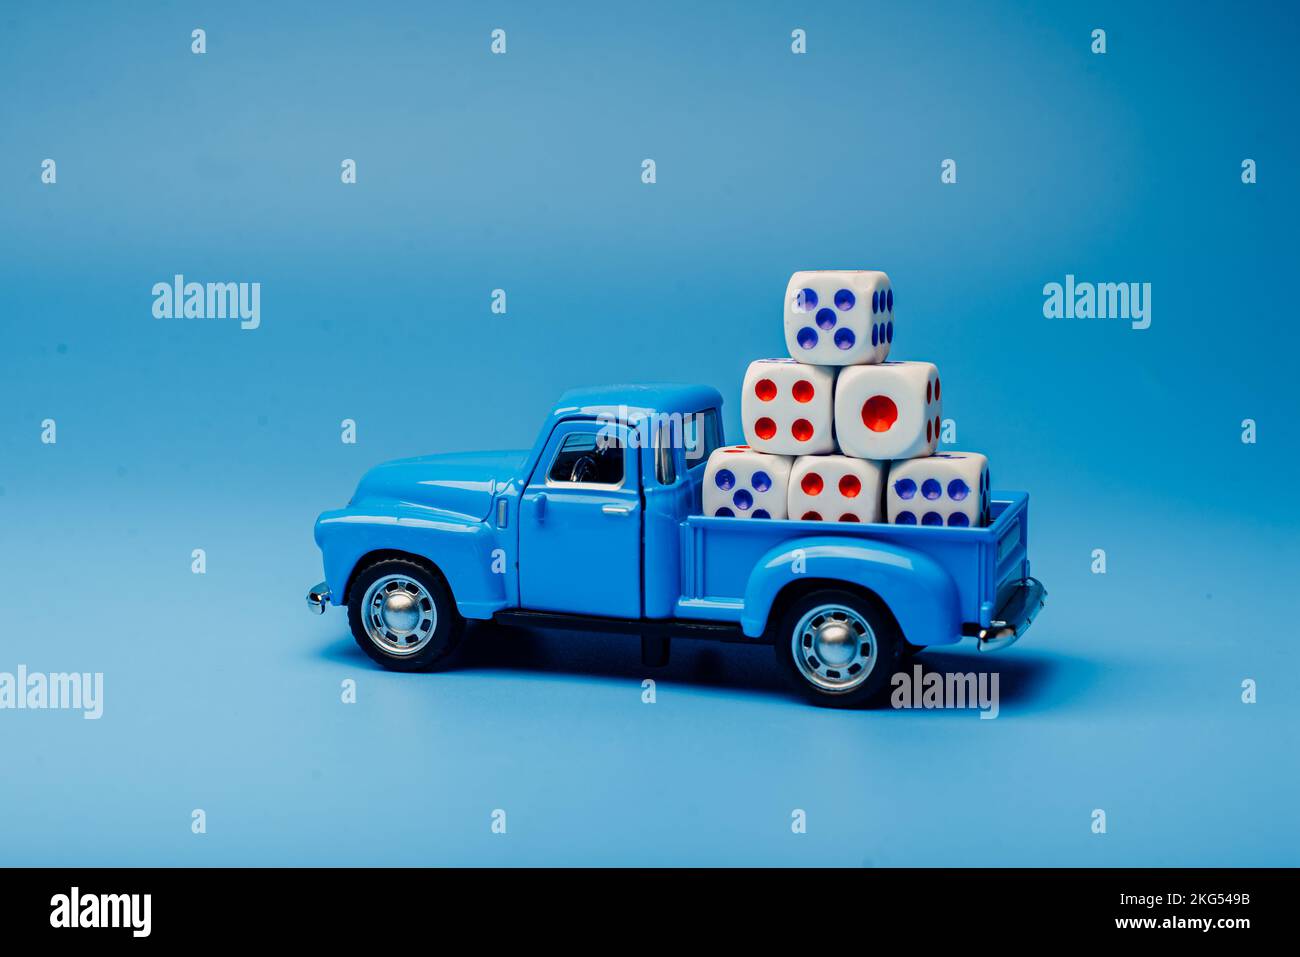 Toy car with cubes with numbers on the car. Stock Photo